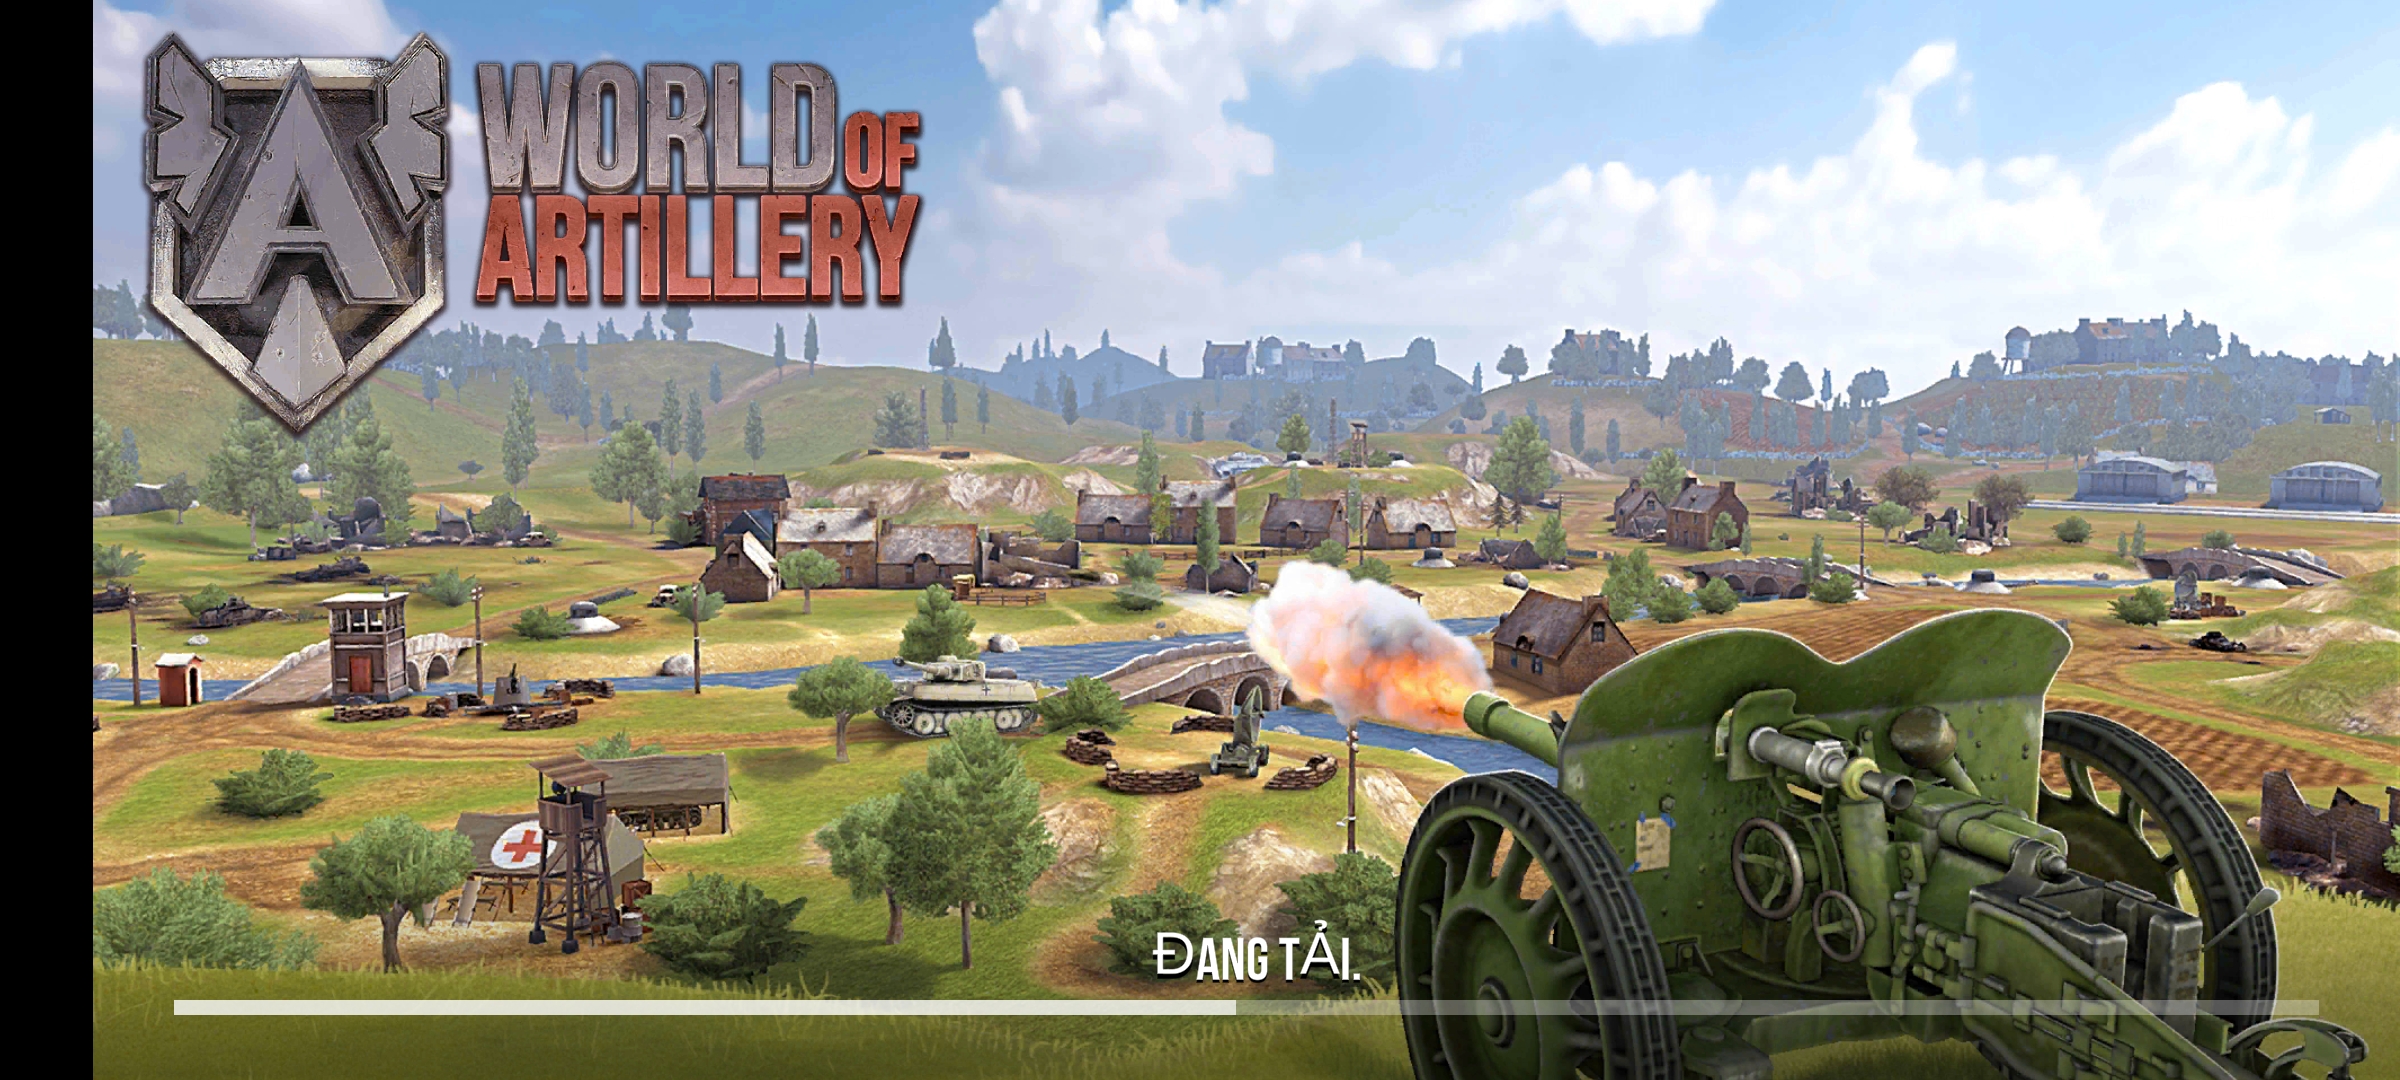 [Game Android] World of Artillery: Cannon Tiếng Việt